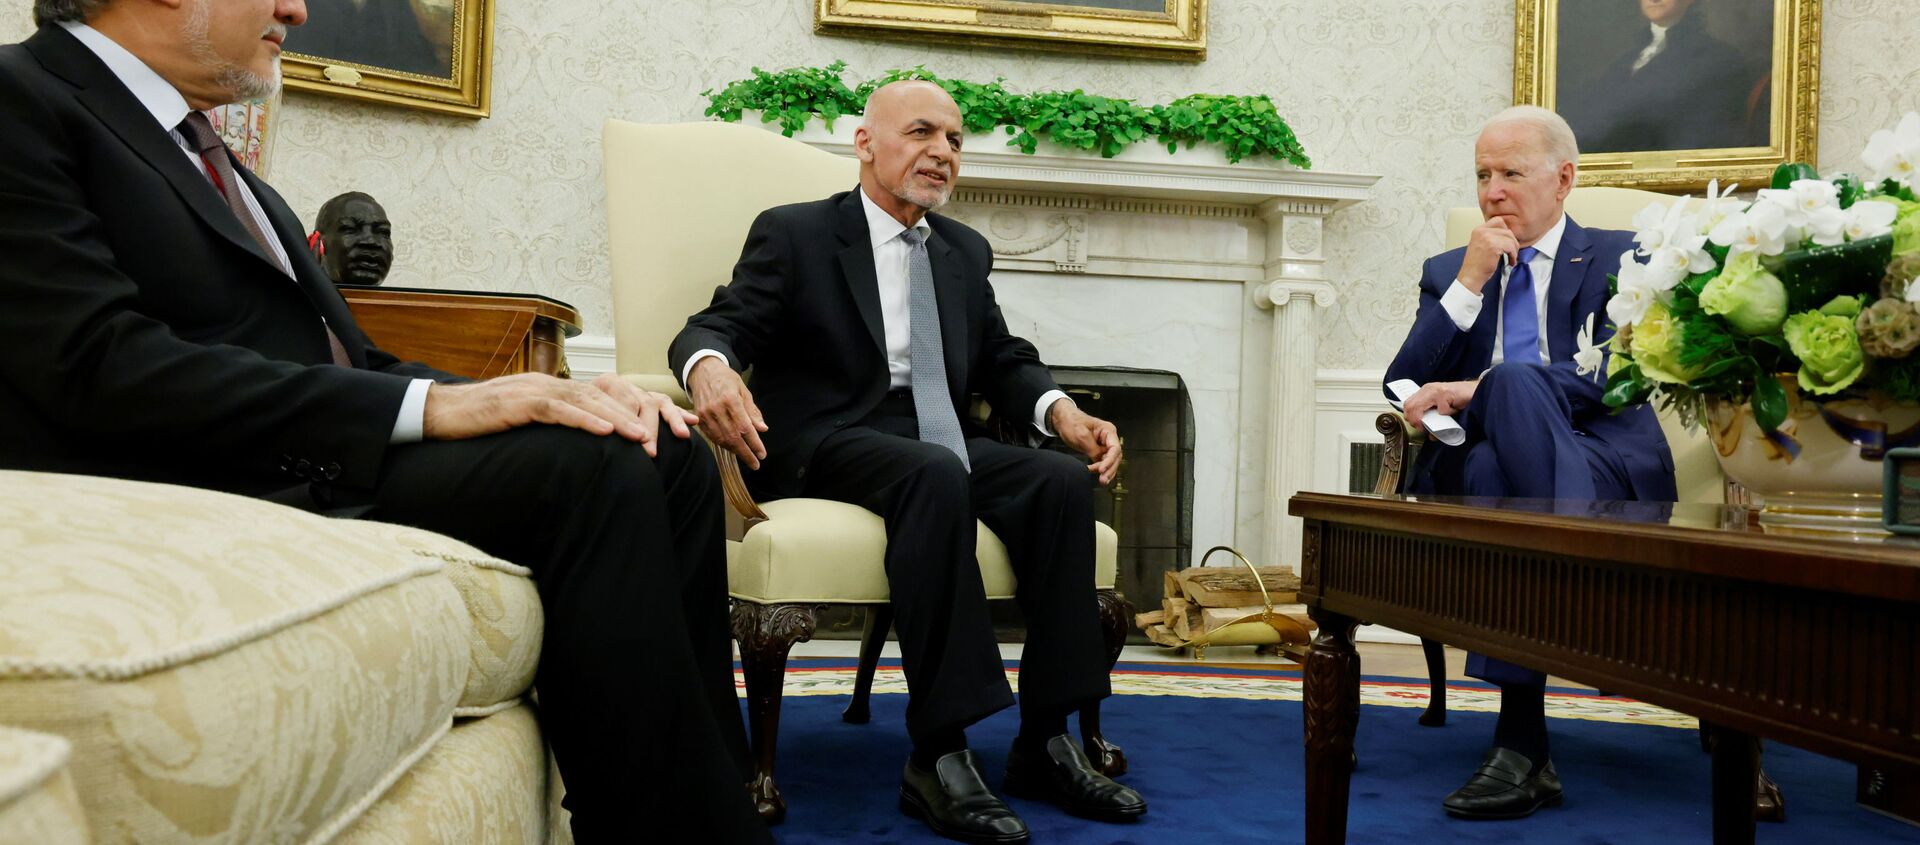 U.S. President Joe Biden meets with Afghan President Ashraf Ghani and Chairman of Afghanistan's High Council for National Reconciliation Abdullah Abdullah at the White House, in Washington, U.S., June 25, 2021. - Sputnik International, 1920, 01.09.2021